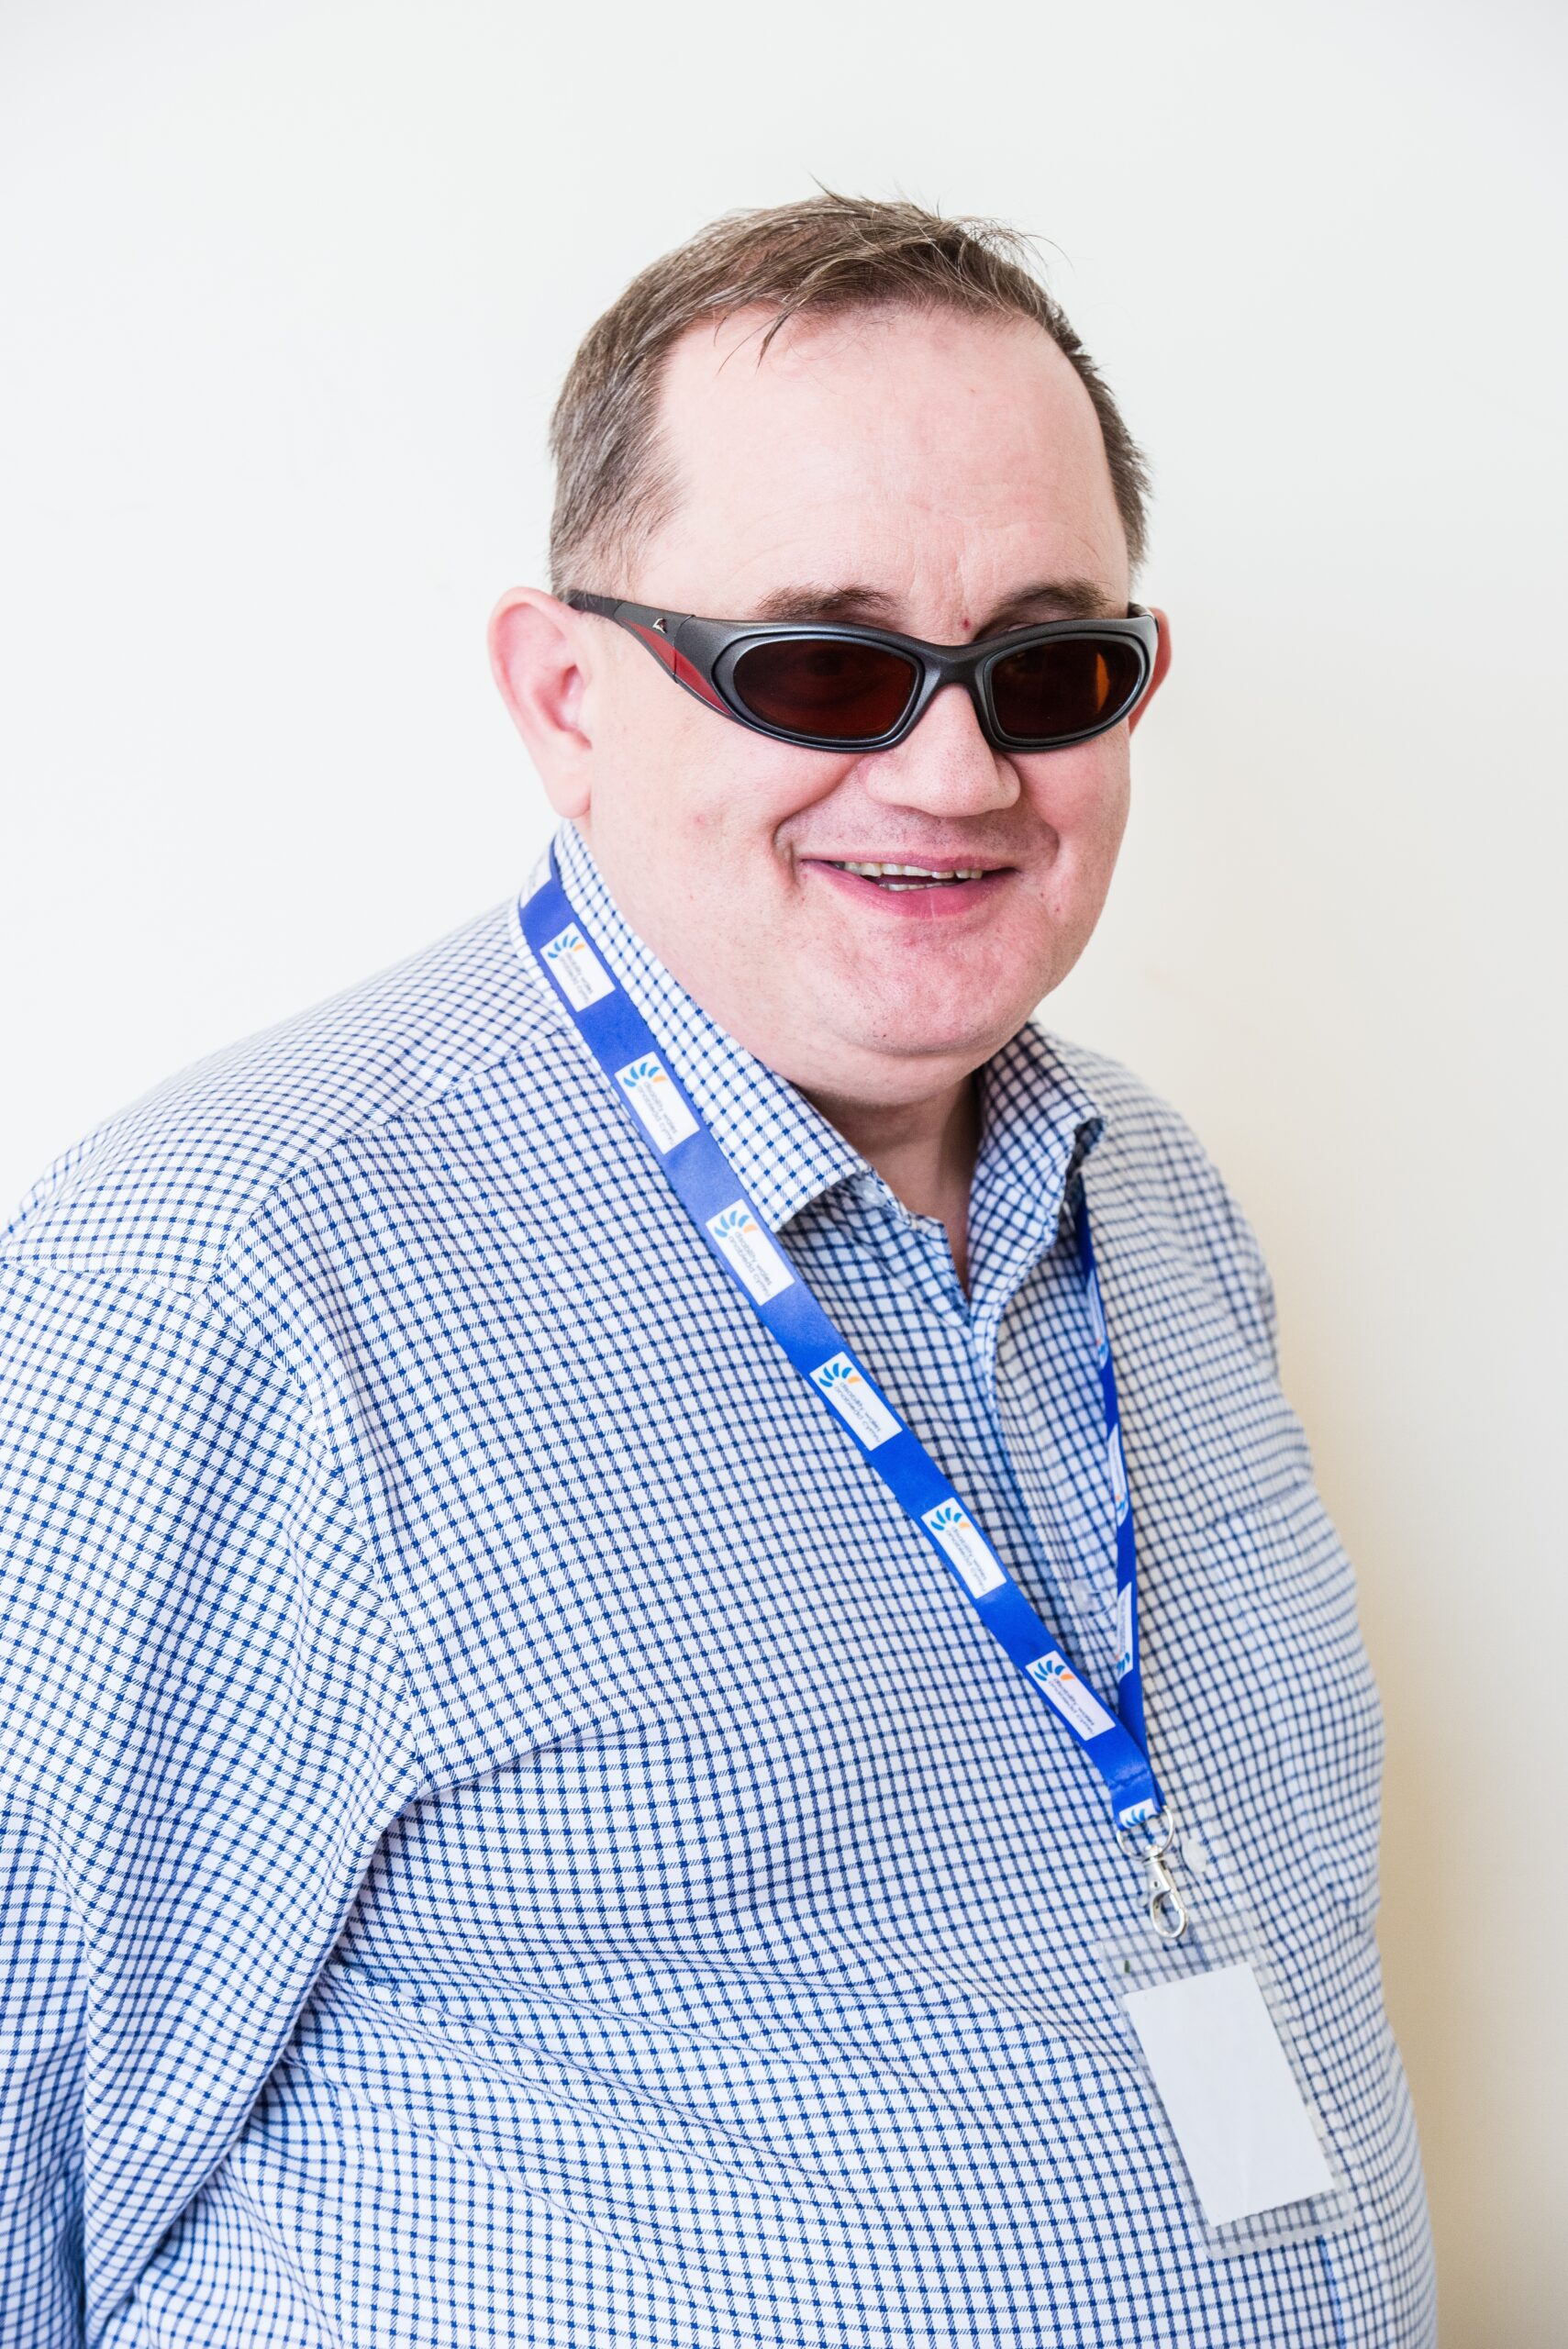 Philip Westcott smiling at the camera. He wears a blue check shirt, a DW lanyard and sunglasses. He has brown hair.